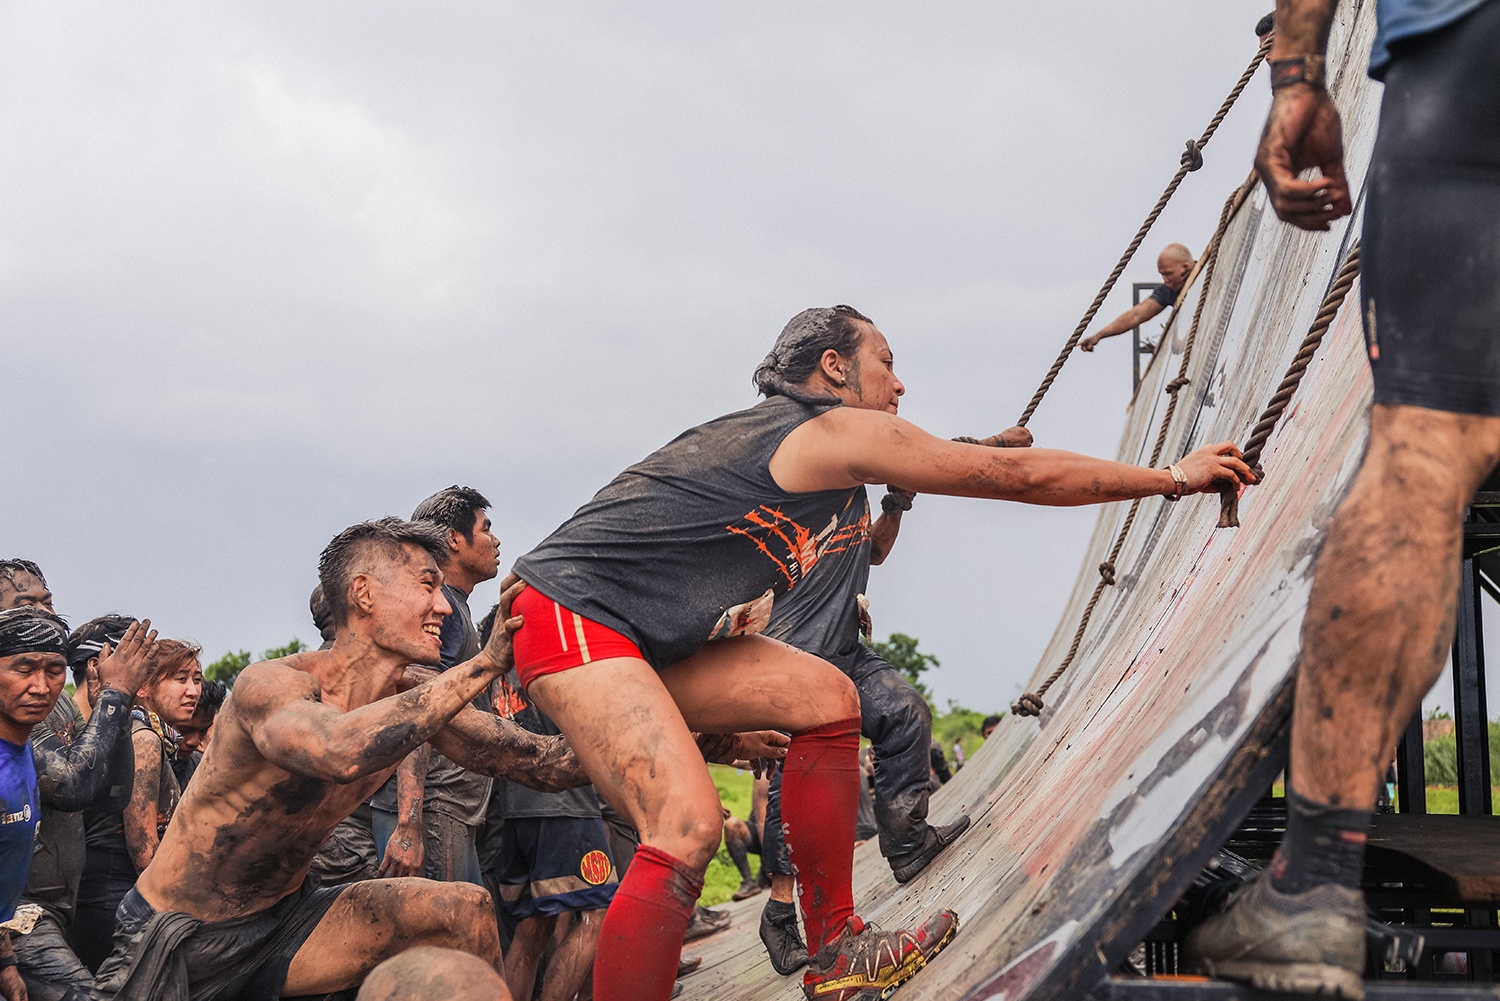 Obstacle Course Racing - Difficulty of obstacles